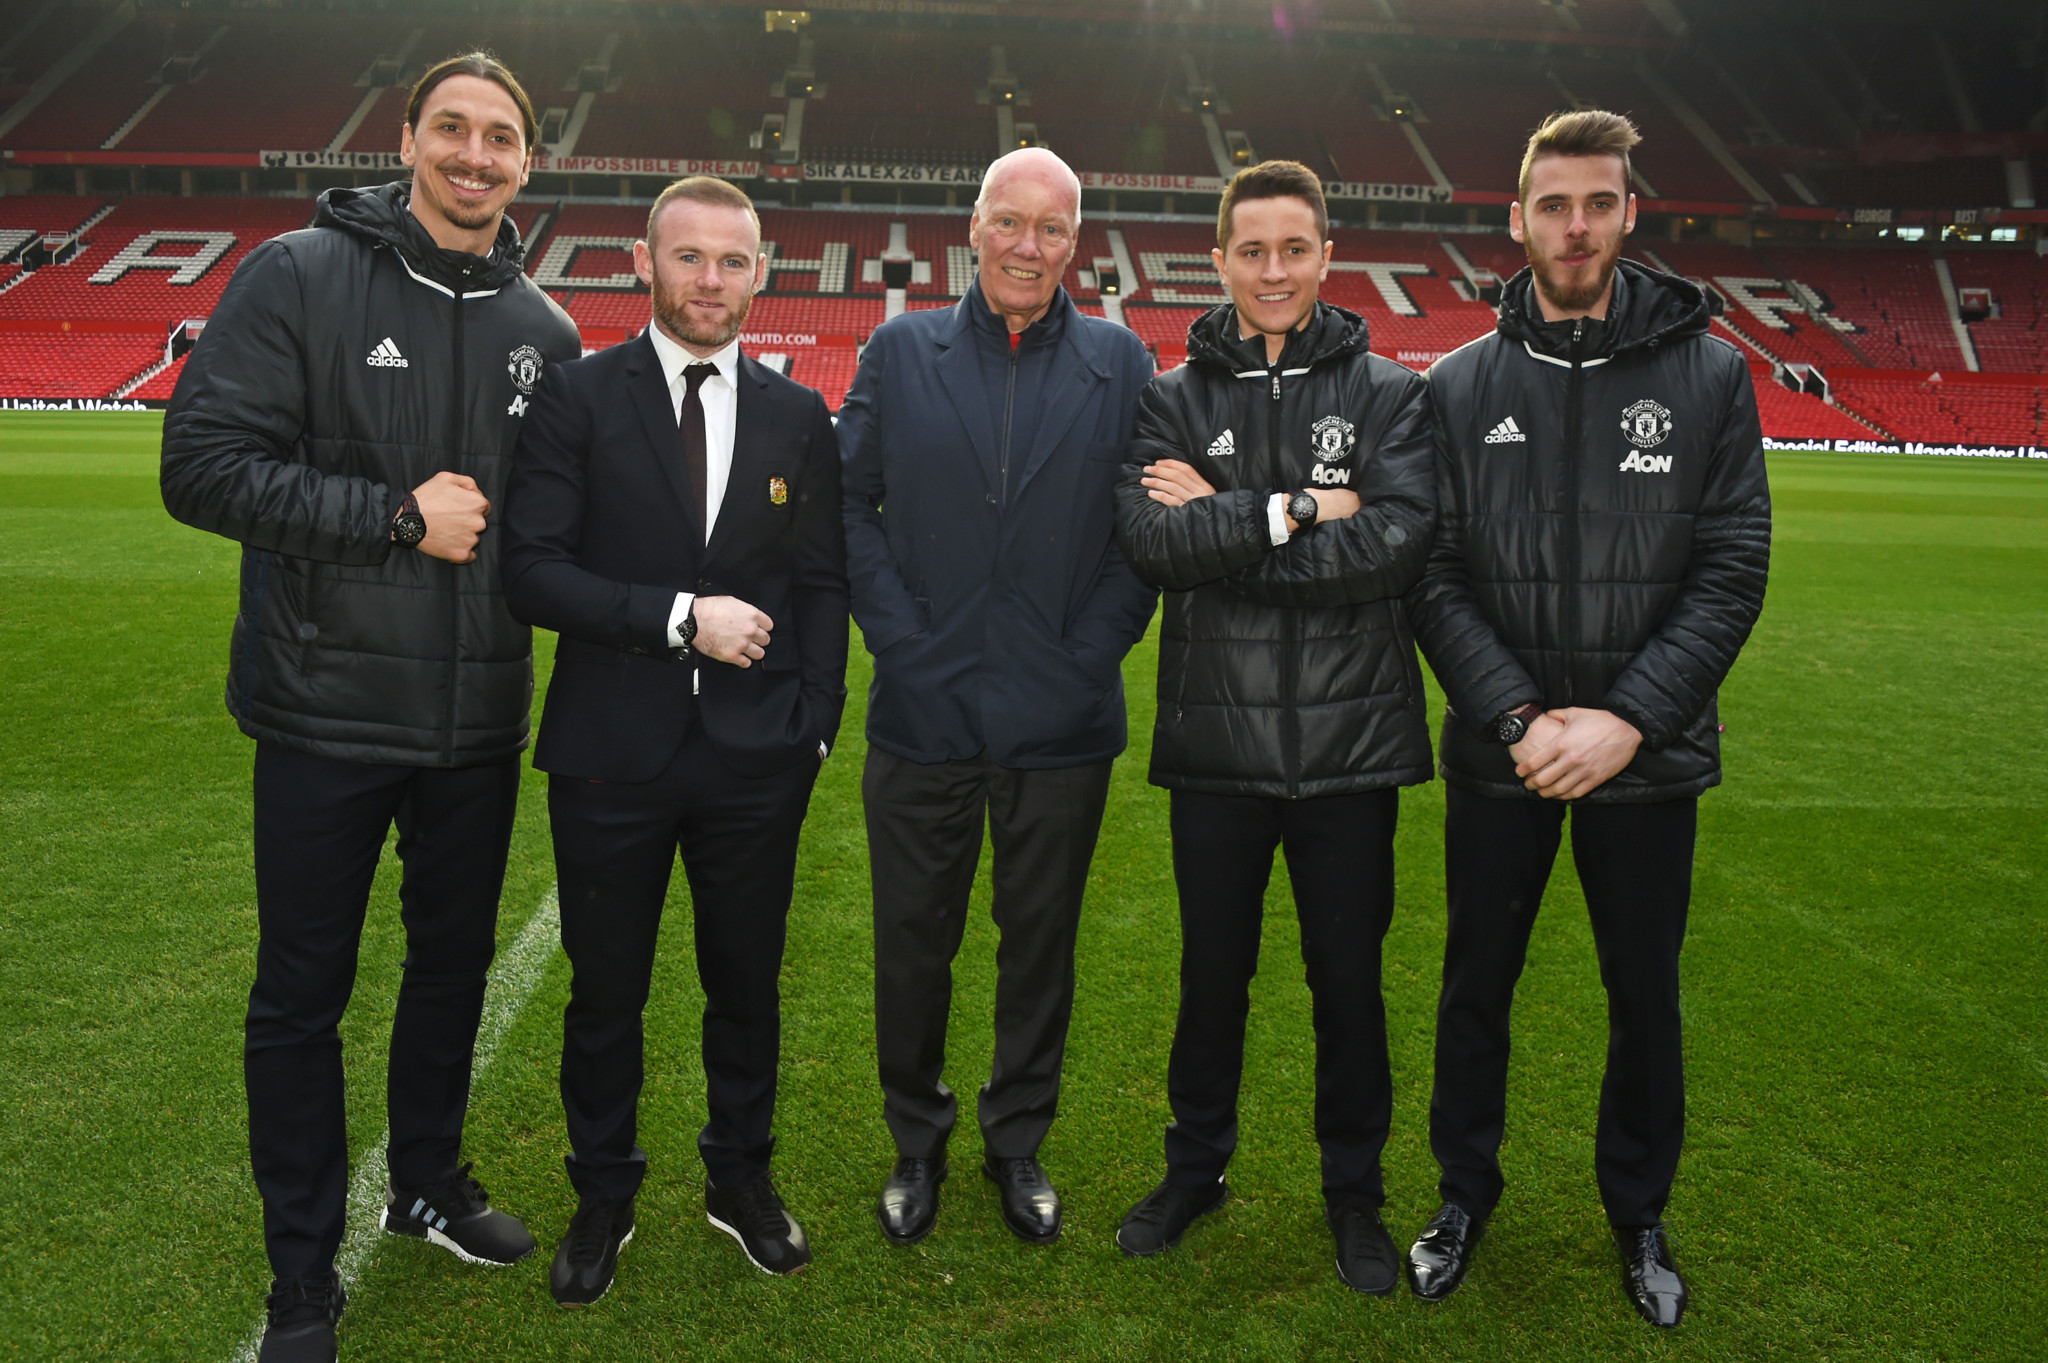 Dmb tag heuer manchester united watches launch044